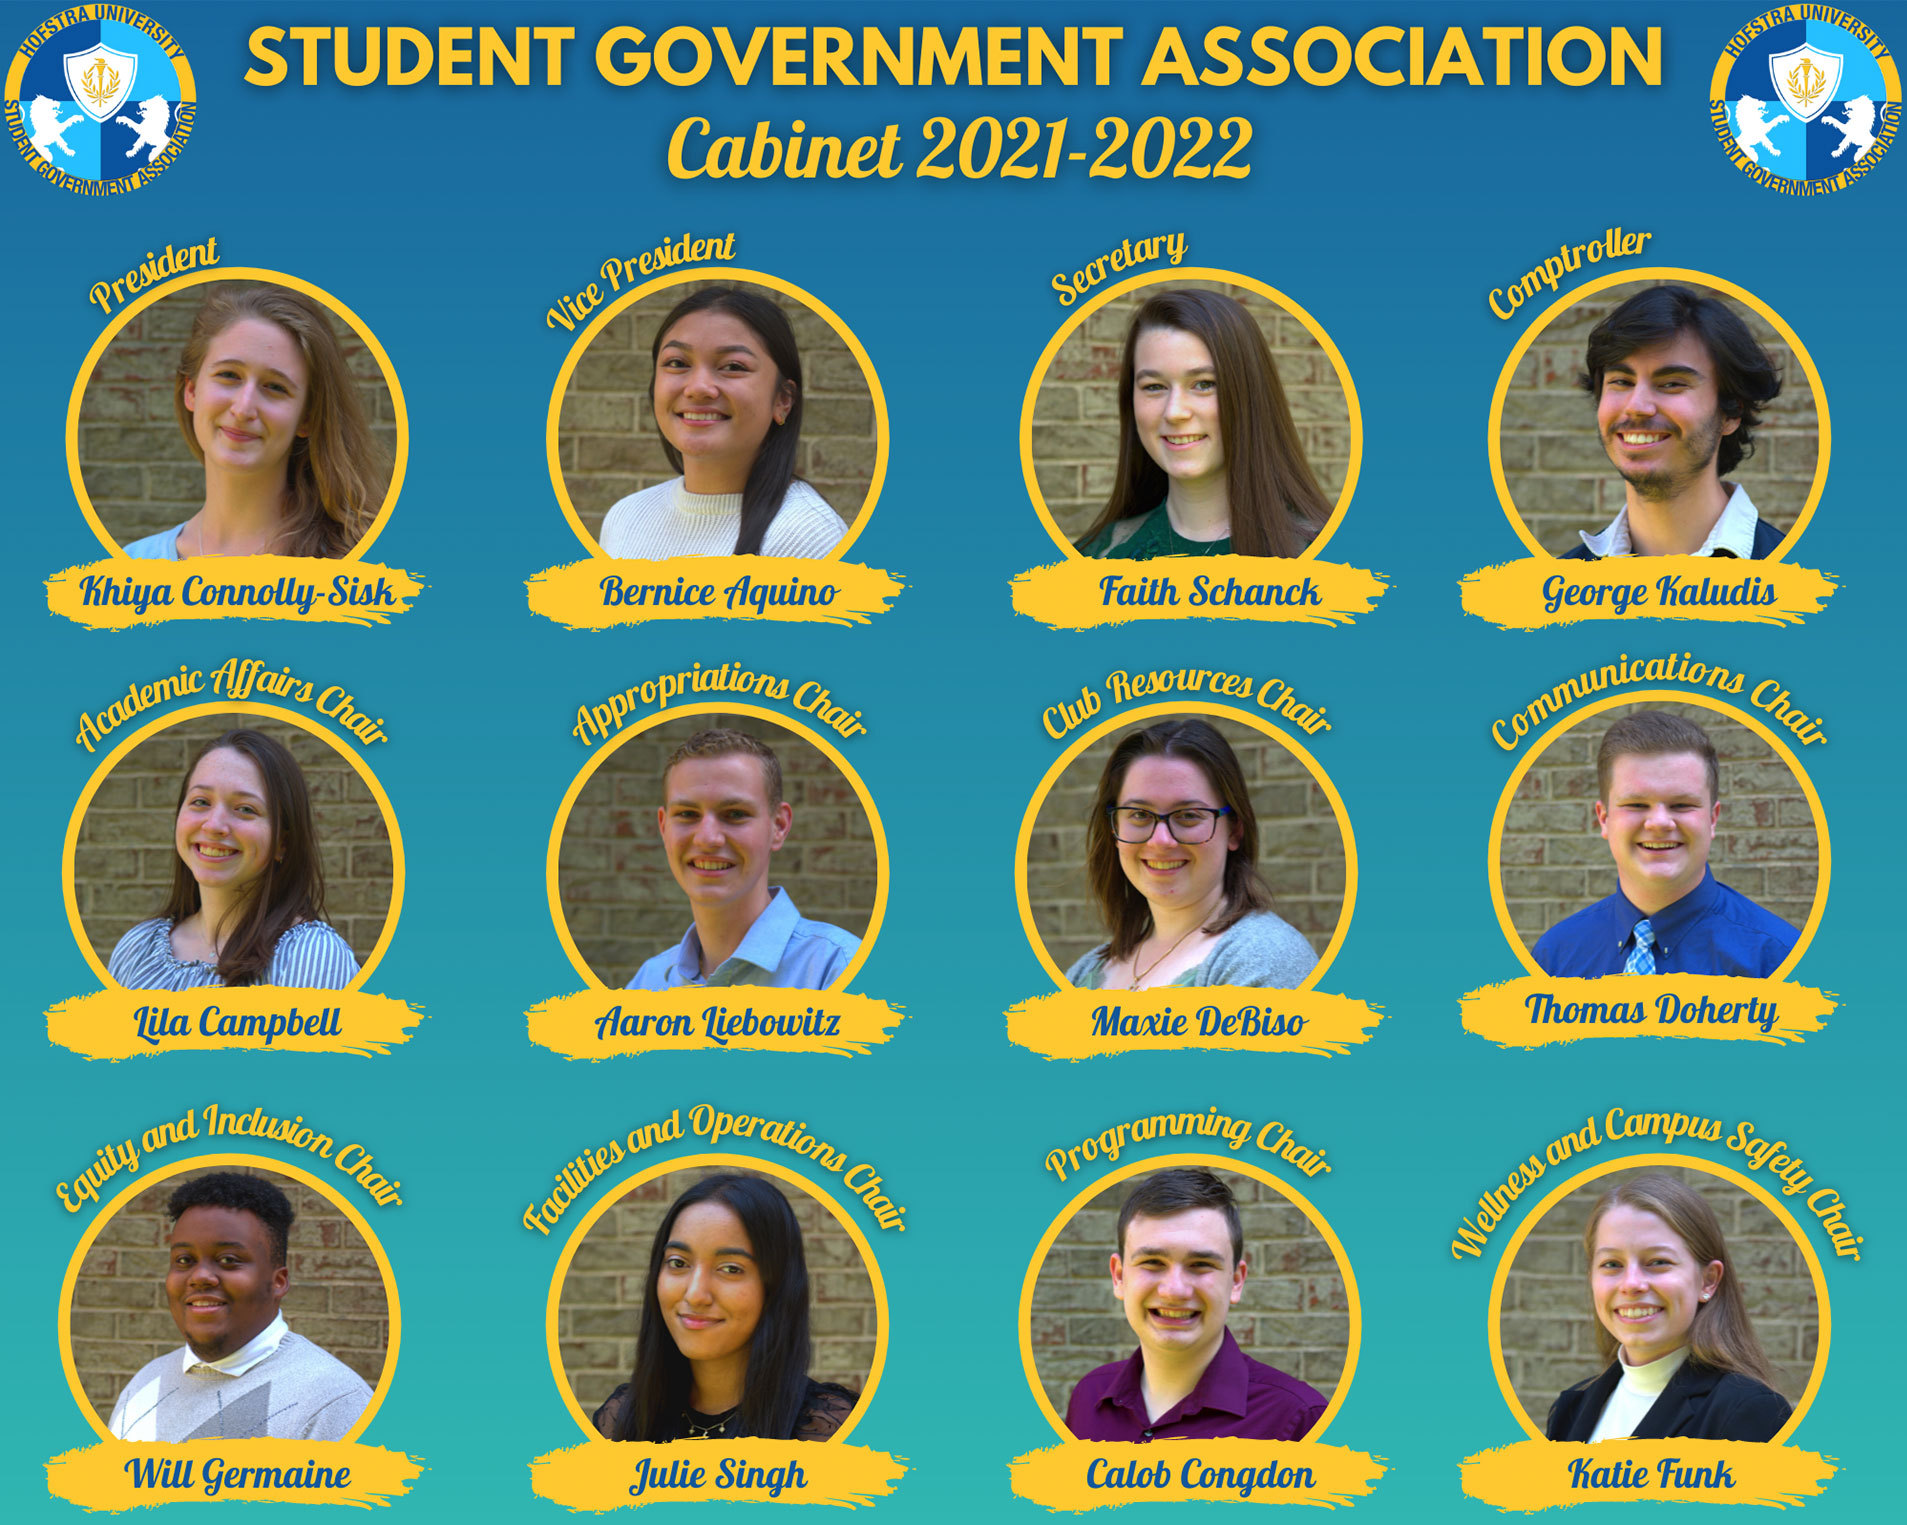 Student Government Association Cabinet 2020-2021